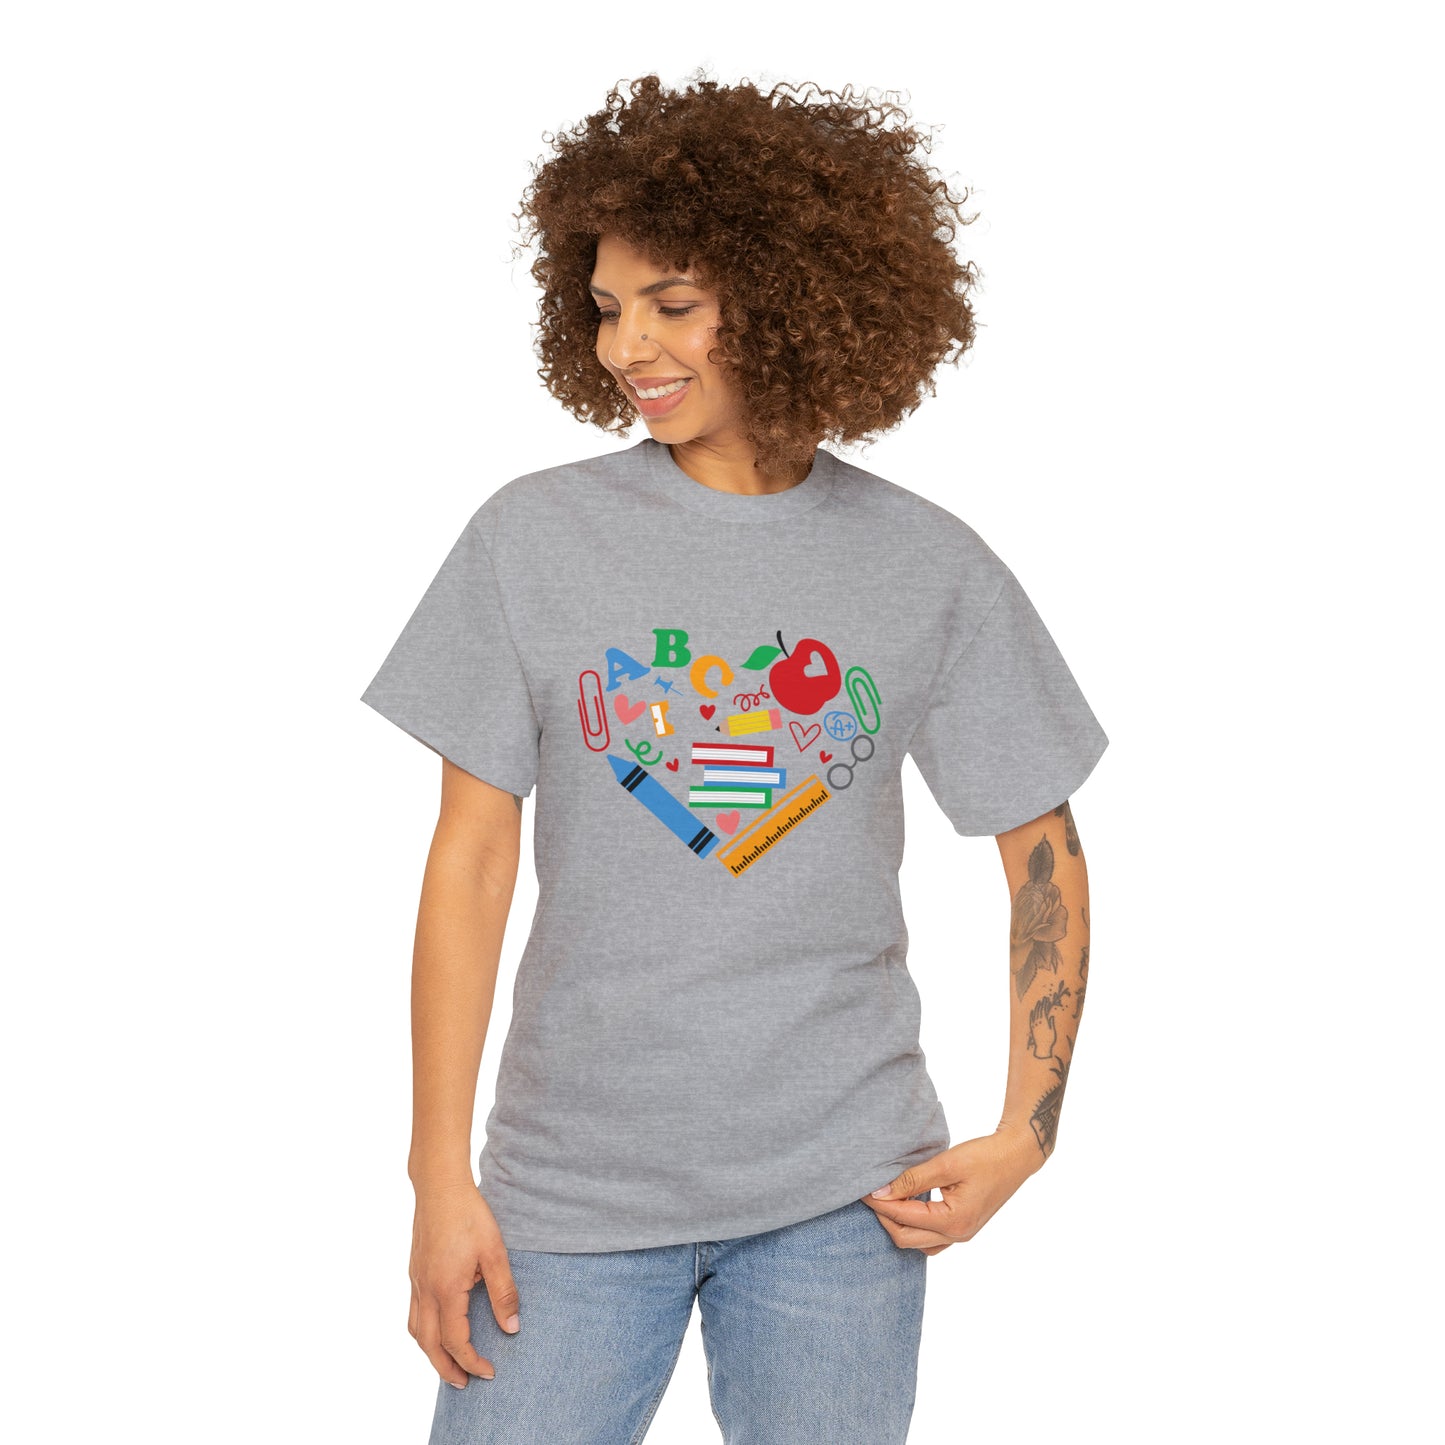 Mock up of a slim woman wearing the Sport Grey shirt